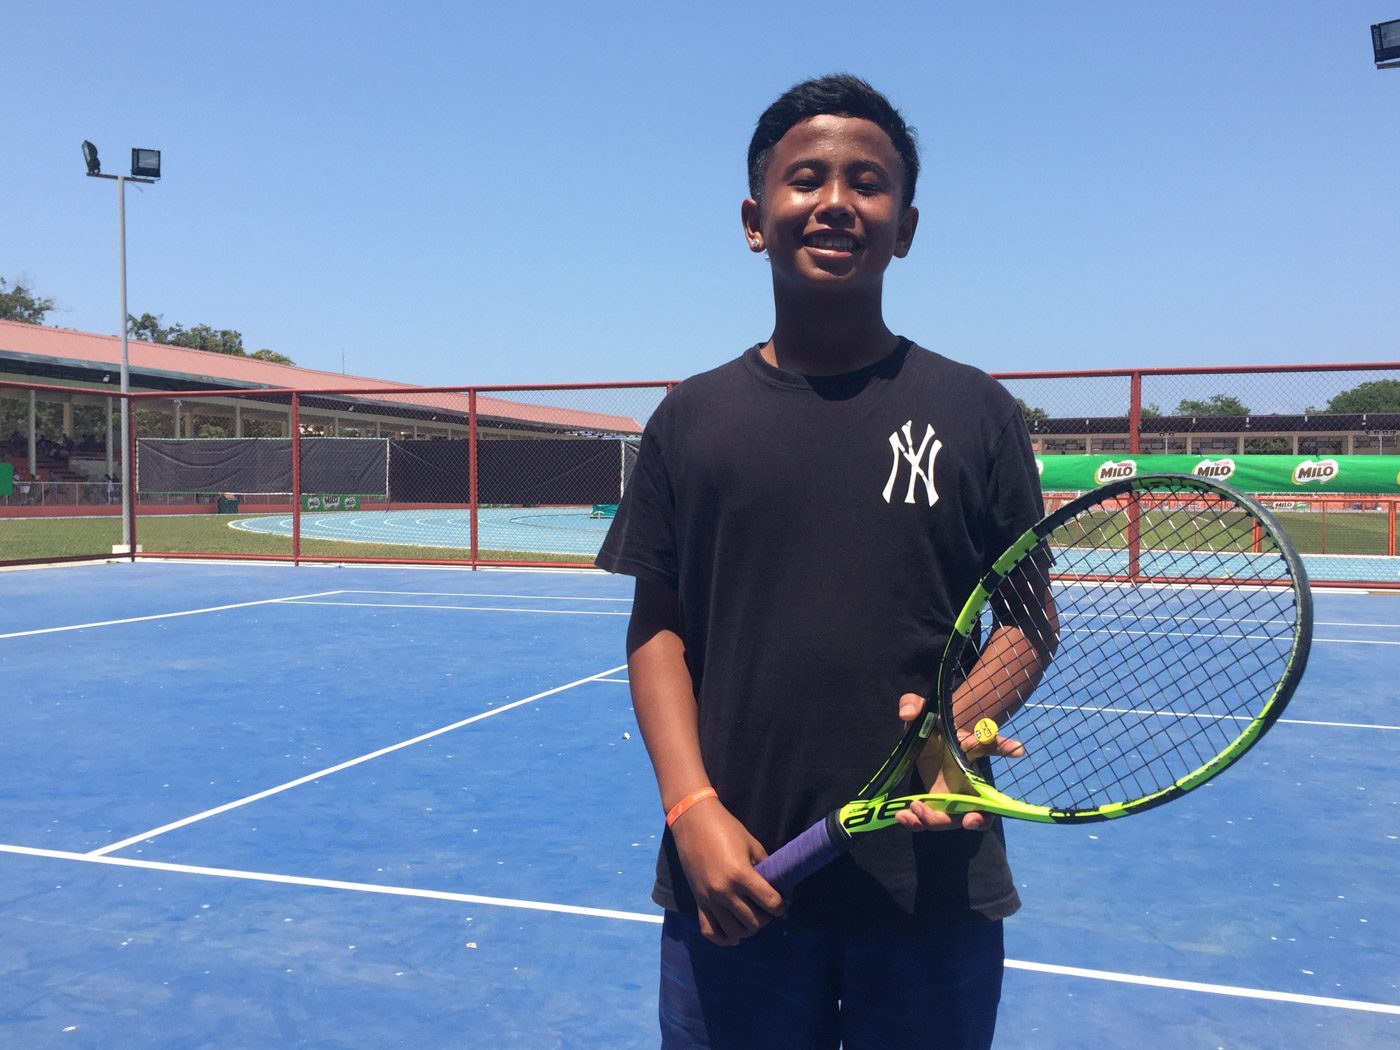 Lone Palaro athlete from Marawi wants to play for UST tennis someday